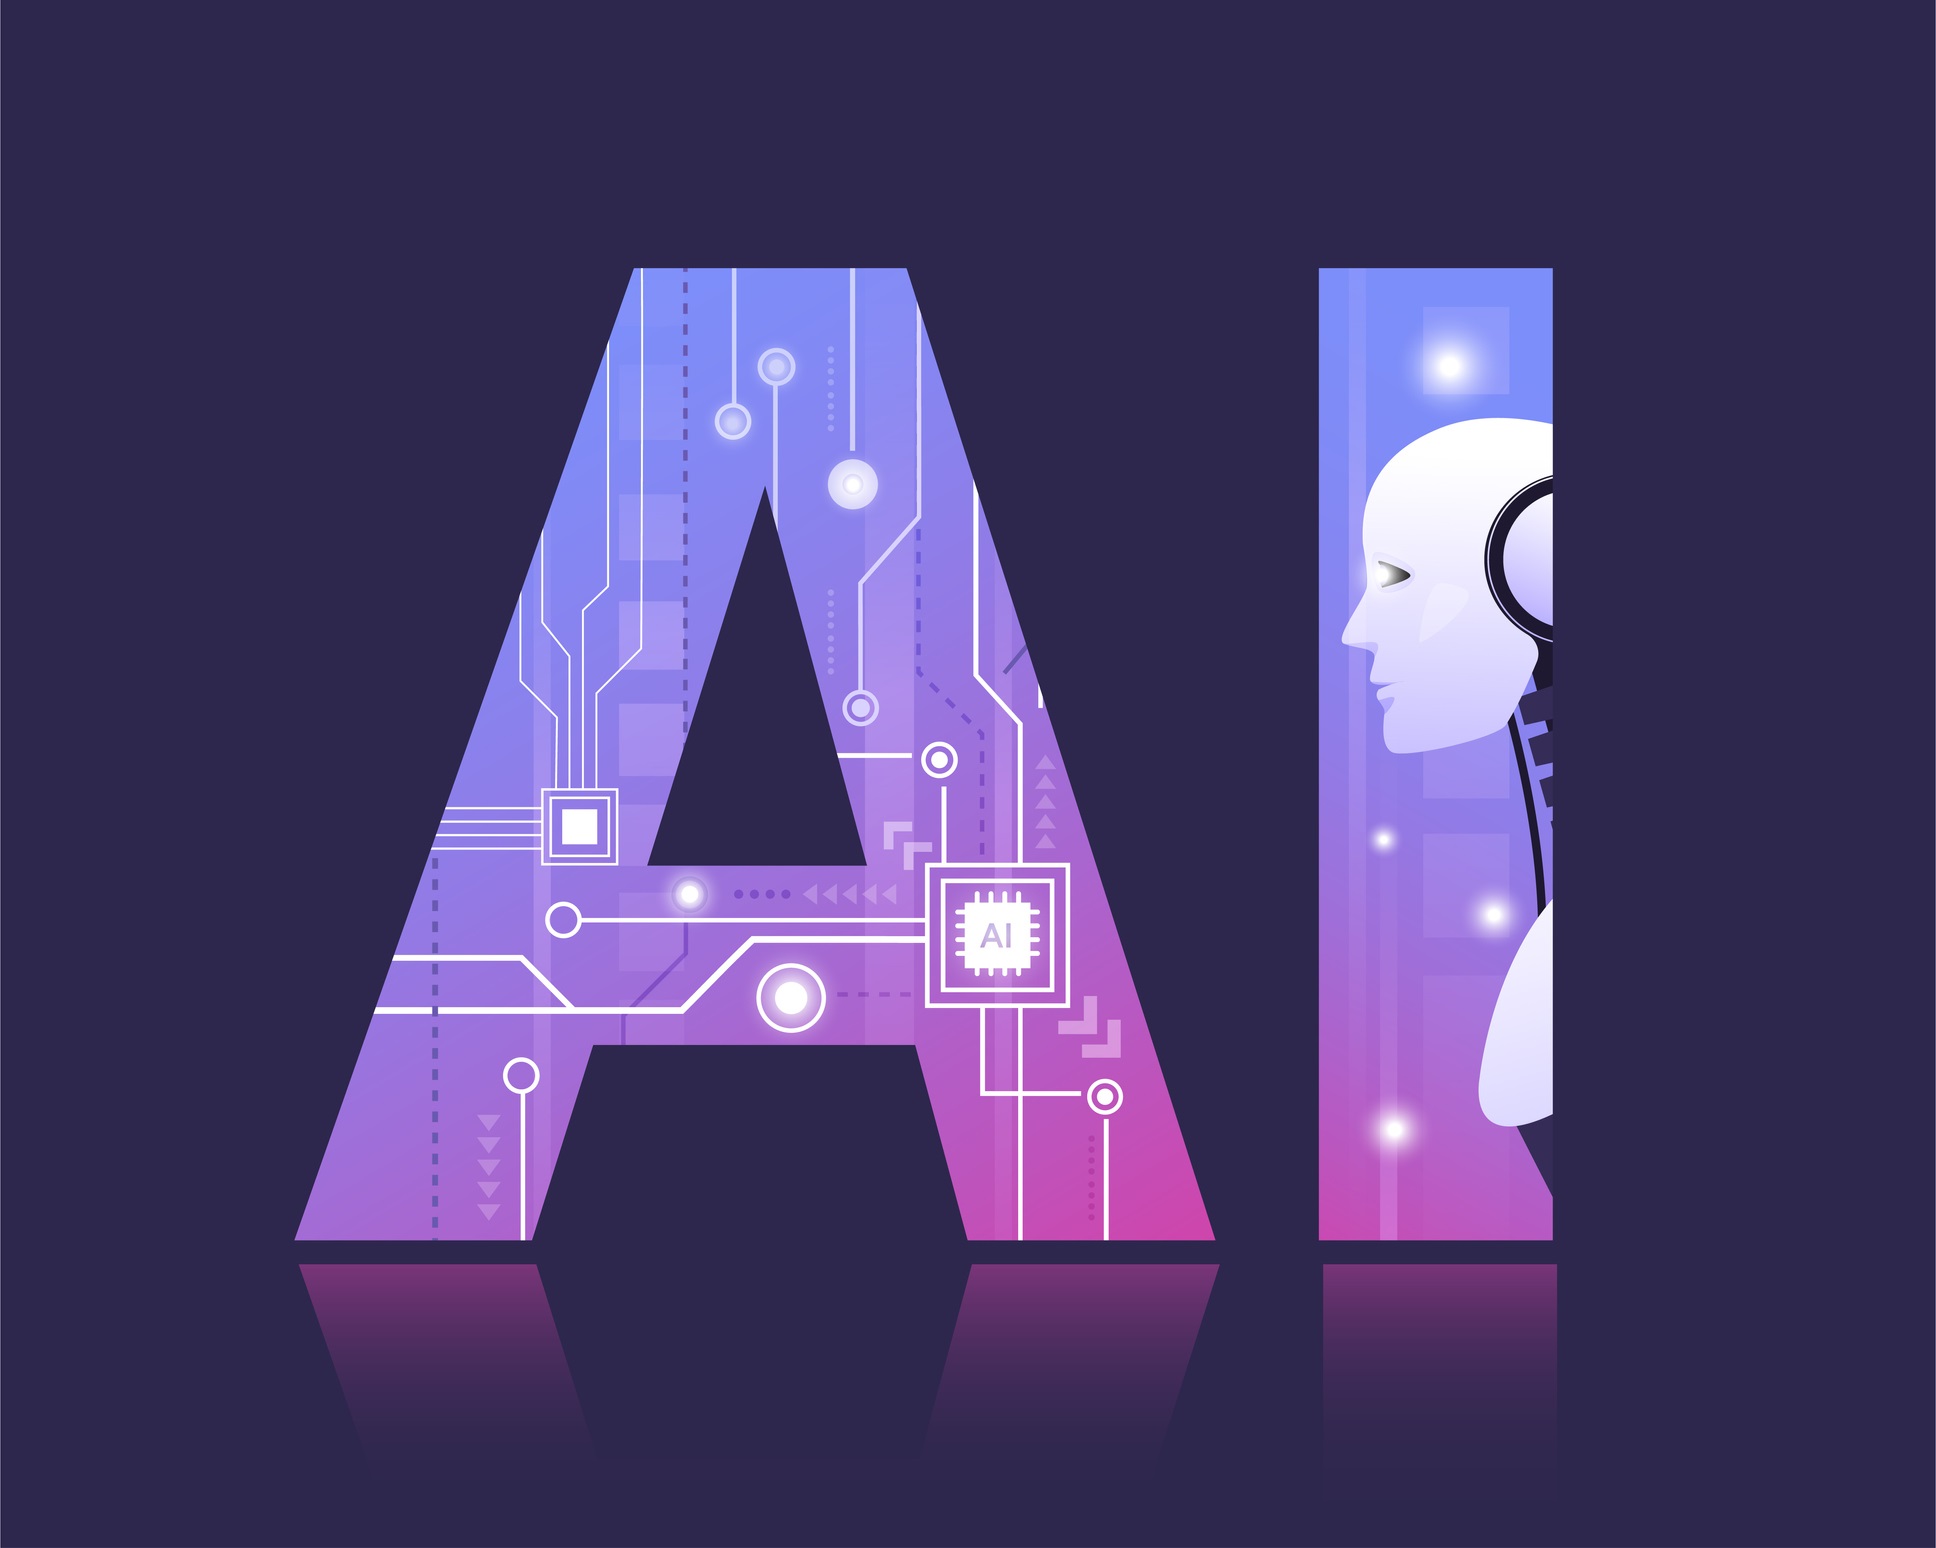 An illustration consisting of purple and white block letters spelling out "AI" and promoting Artificial Intelligence technology for the "New AI Tools" blog.